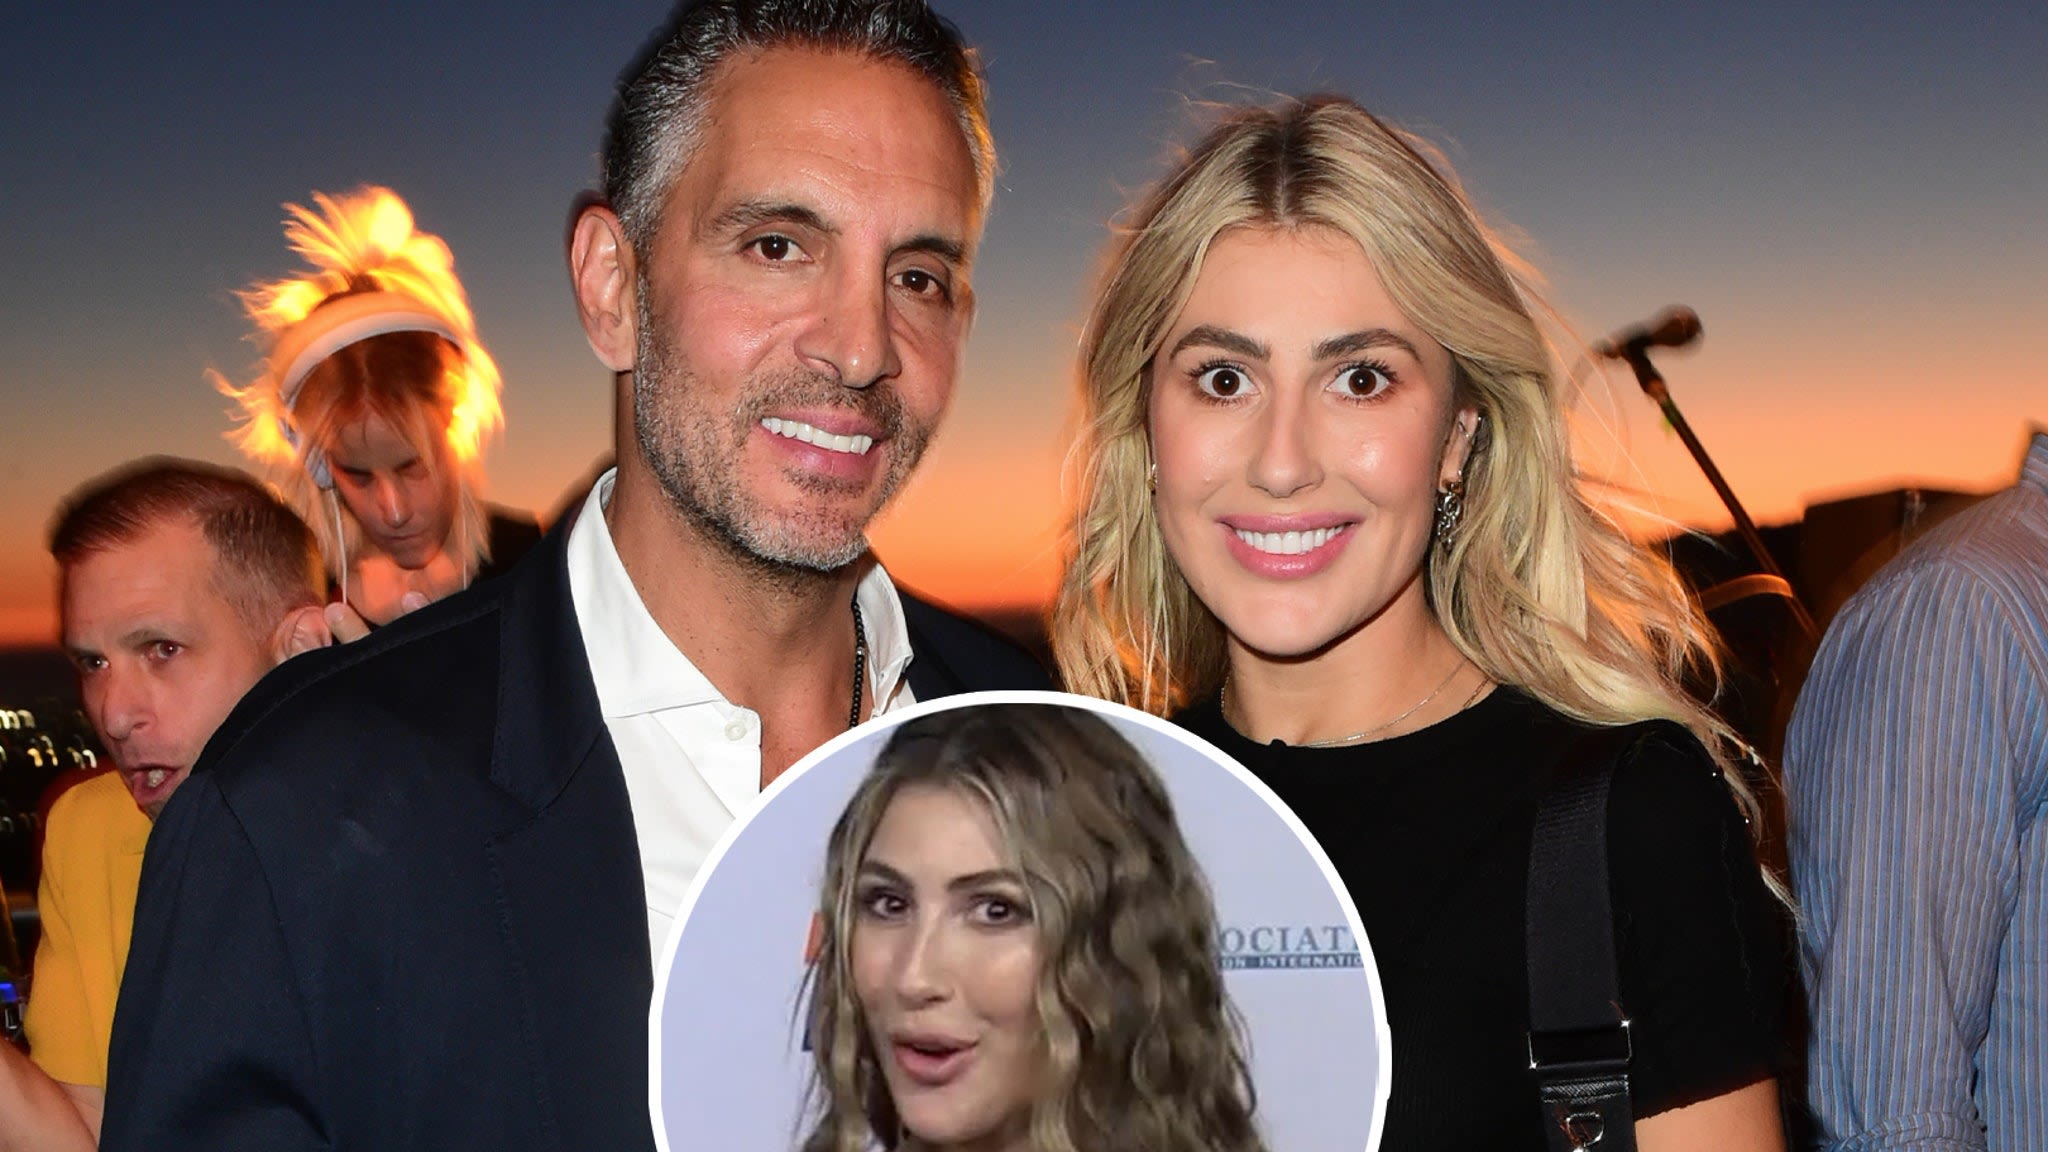 DWTS' Emma Slater Says Mauricio Umansky Drama Was 'Horrible,' Insists He'll Be In Her Life 'Forever' (Exclusive)